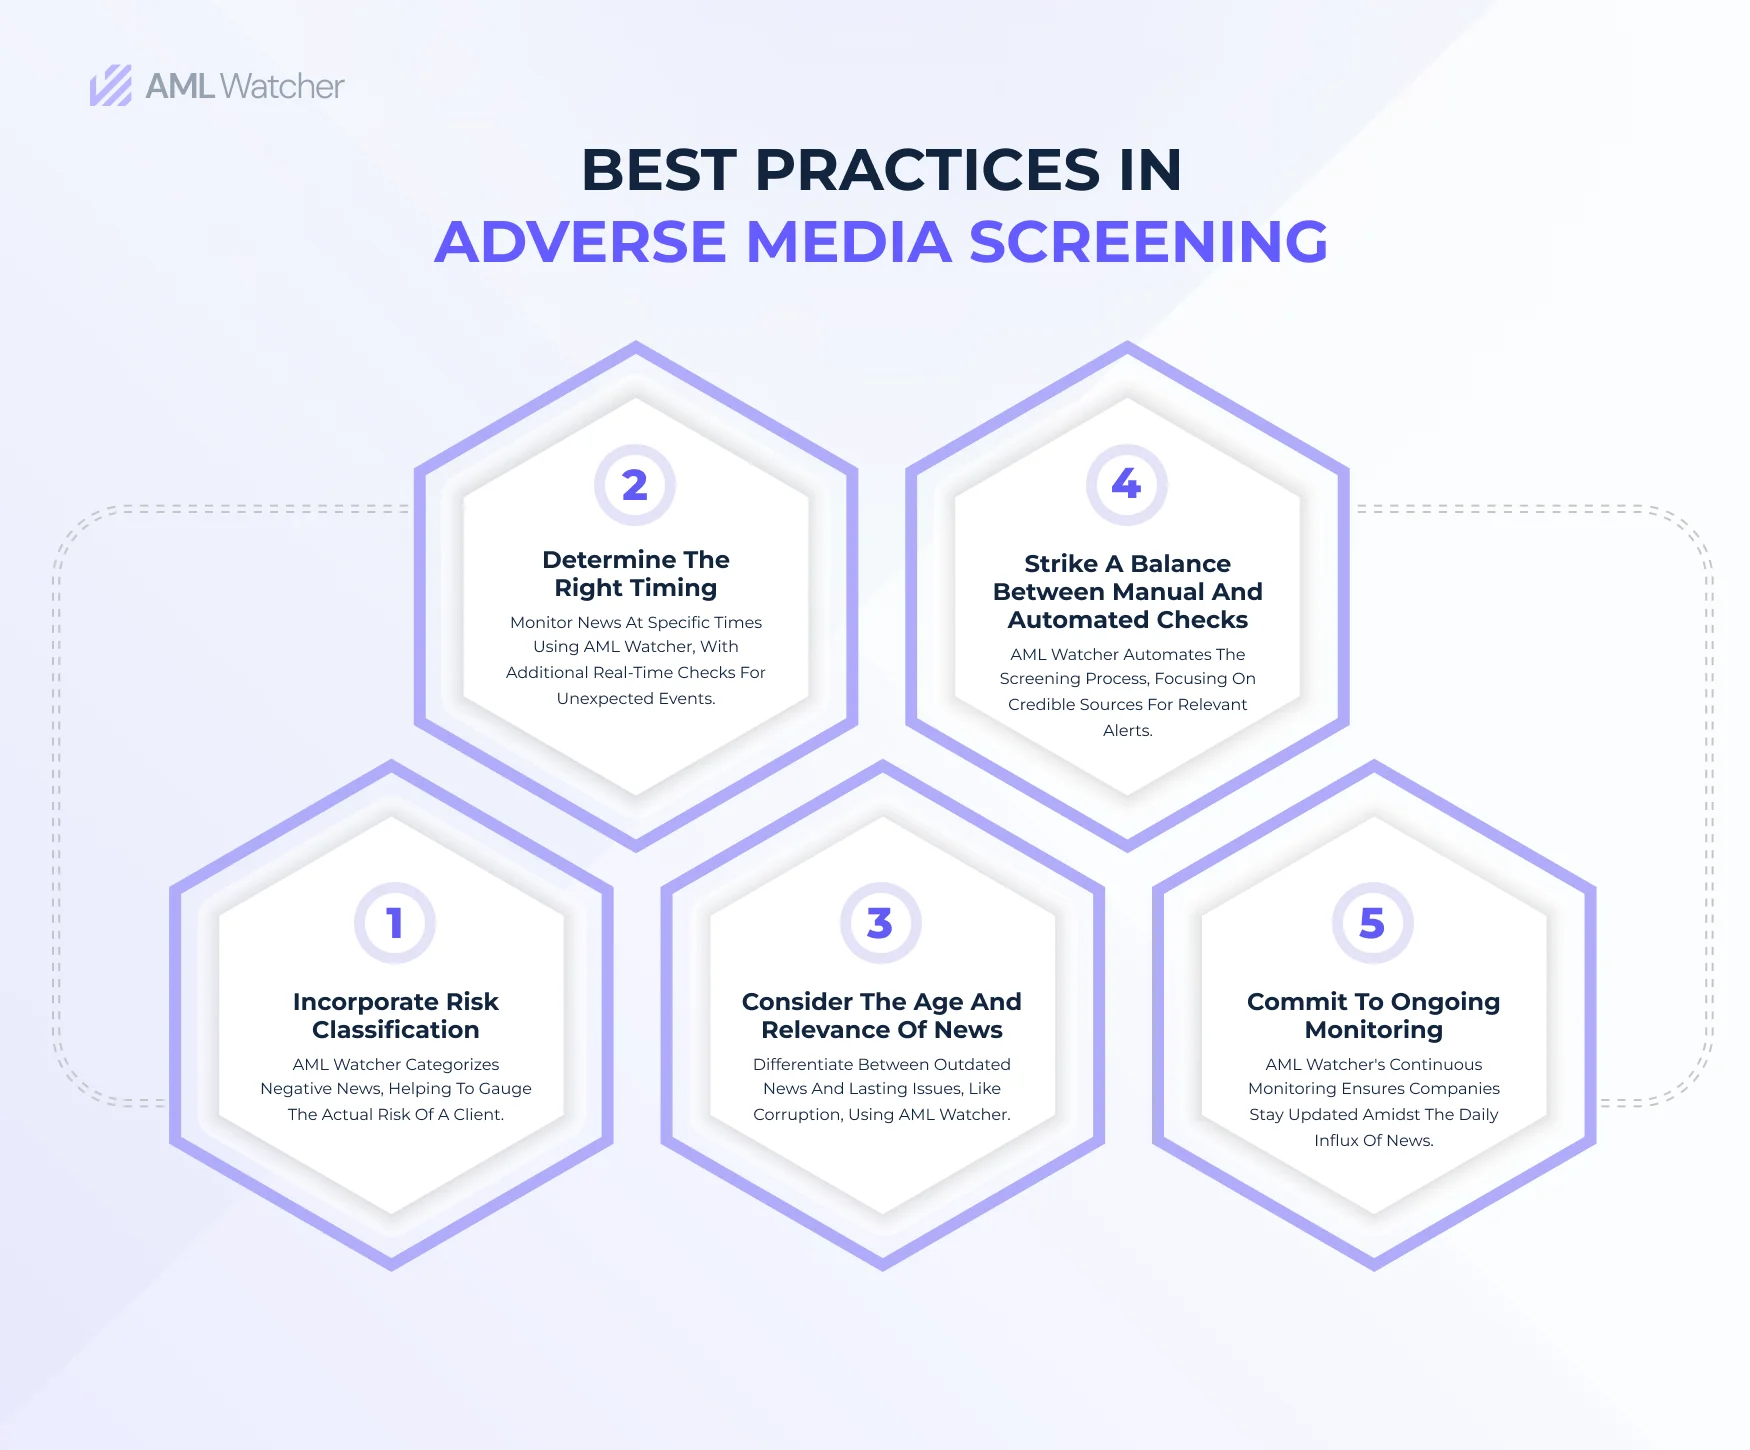 Effective Adverse Media Strategies: Timing, Automation, Risk Classification, Relevance, and Ongoing Monitoring with AML Watcher 